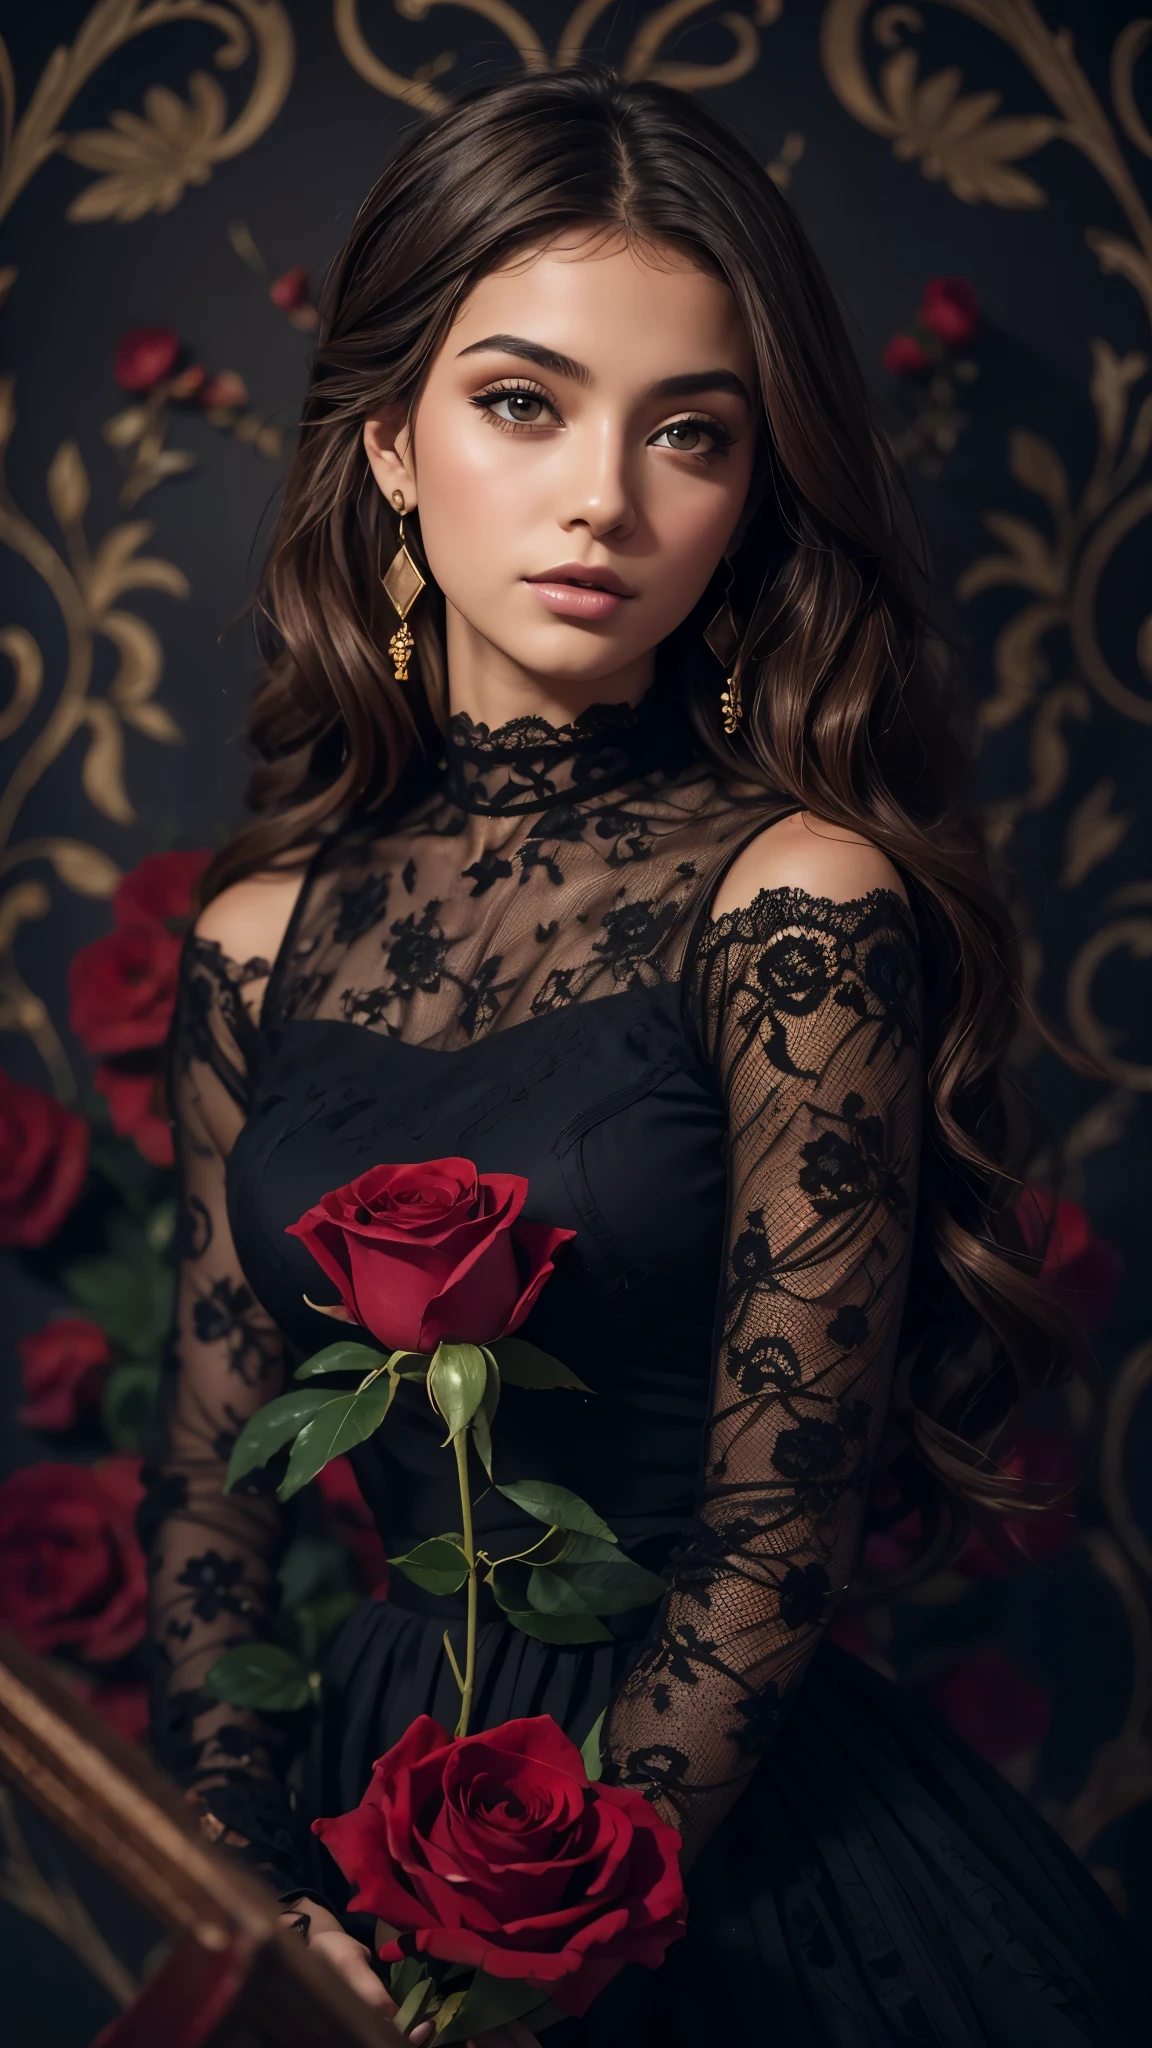 8k, RAW photo, Fujifilm, style photo of a beautiful 16 year old woman, square face, a red rose on the neck, wearing black lace dress with red, golden earrings, strong features like a spinning dove, (highly detailed skin: 1.2), medium brown hair with lights, film grain, 35mm, cute style